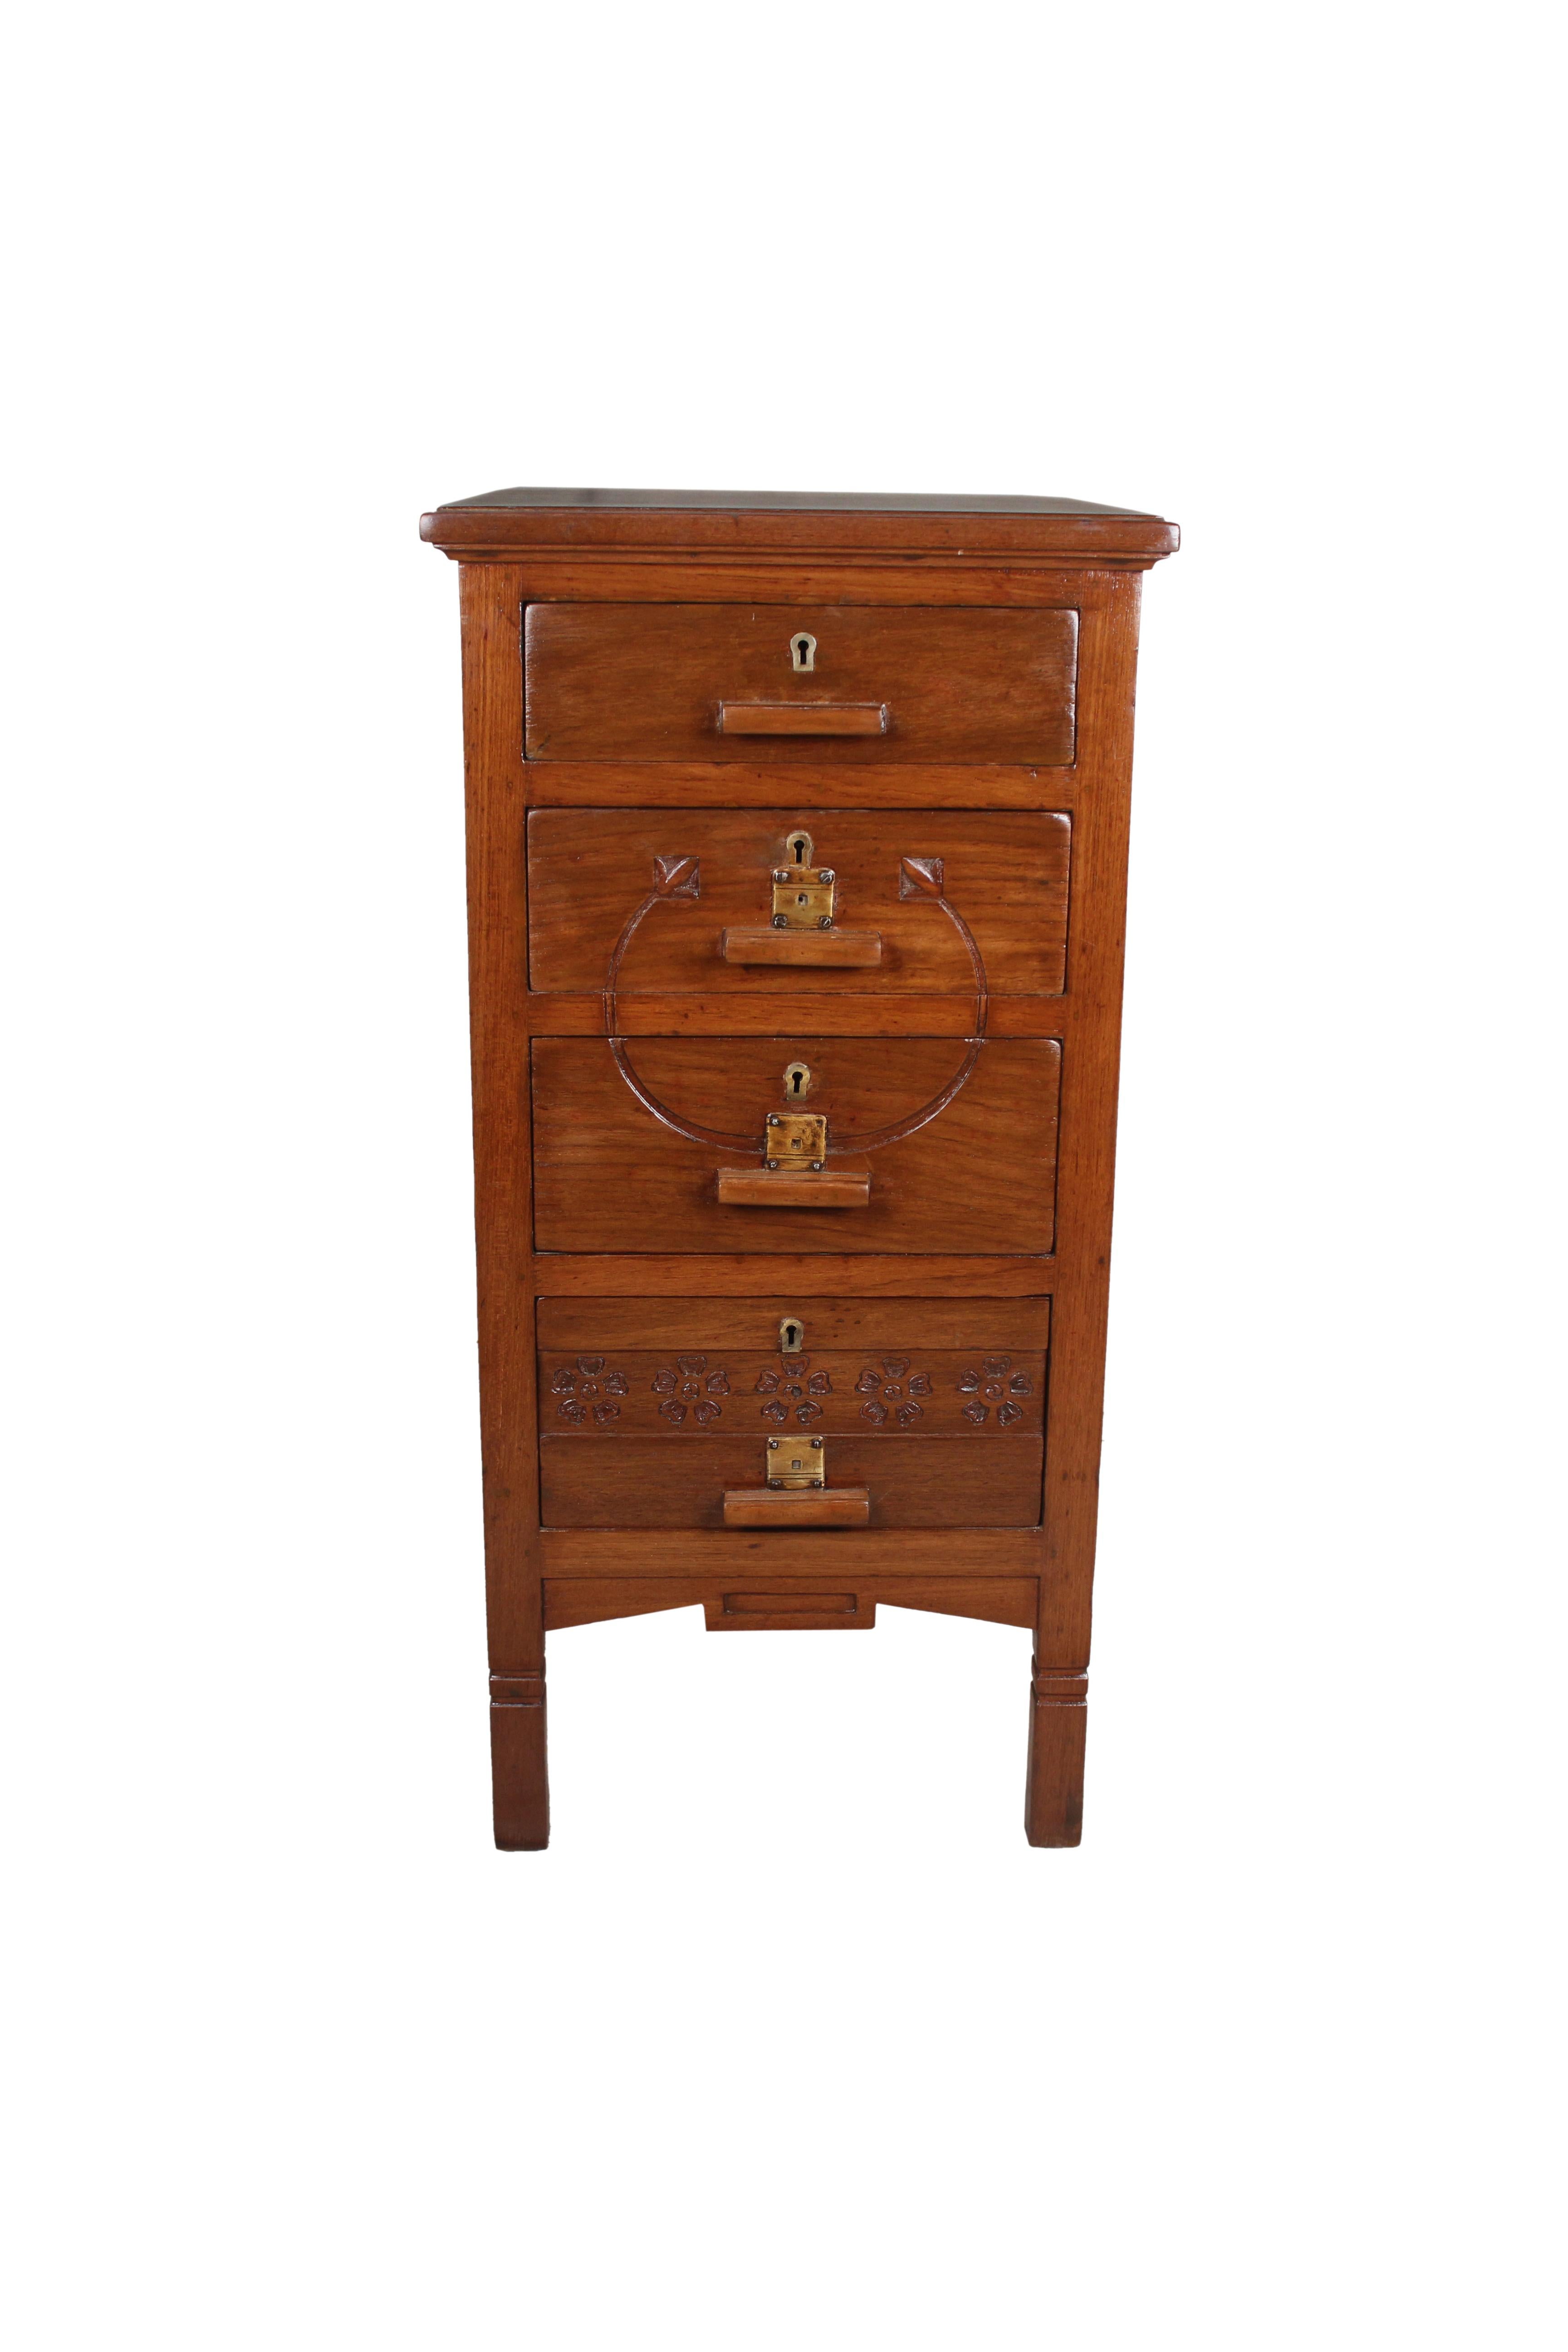 A pair of teak side or end tables that are more like fraternal twins. Same dimensions, wood and details, just slightly different uses and Asian adornments. The pulls are wood with brass escutcheons with working locks, and each offers it's own